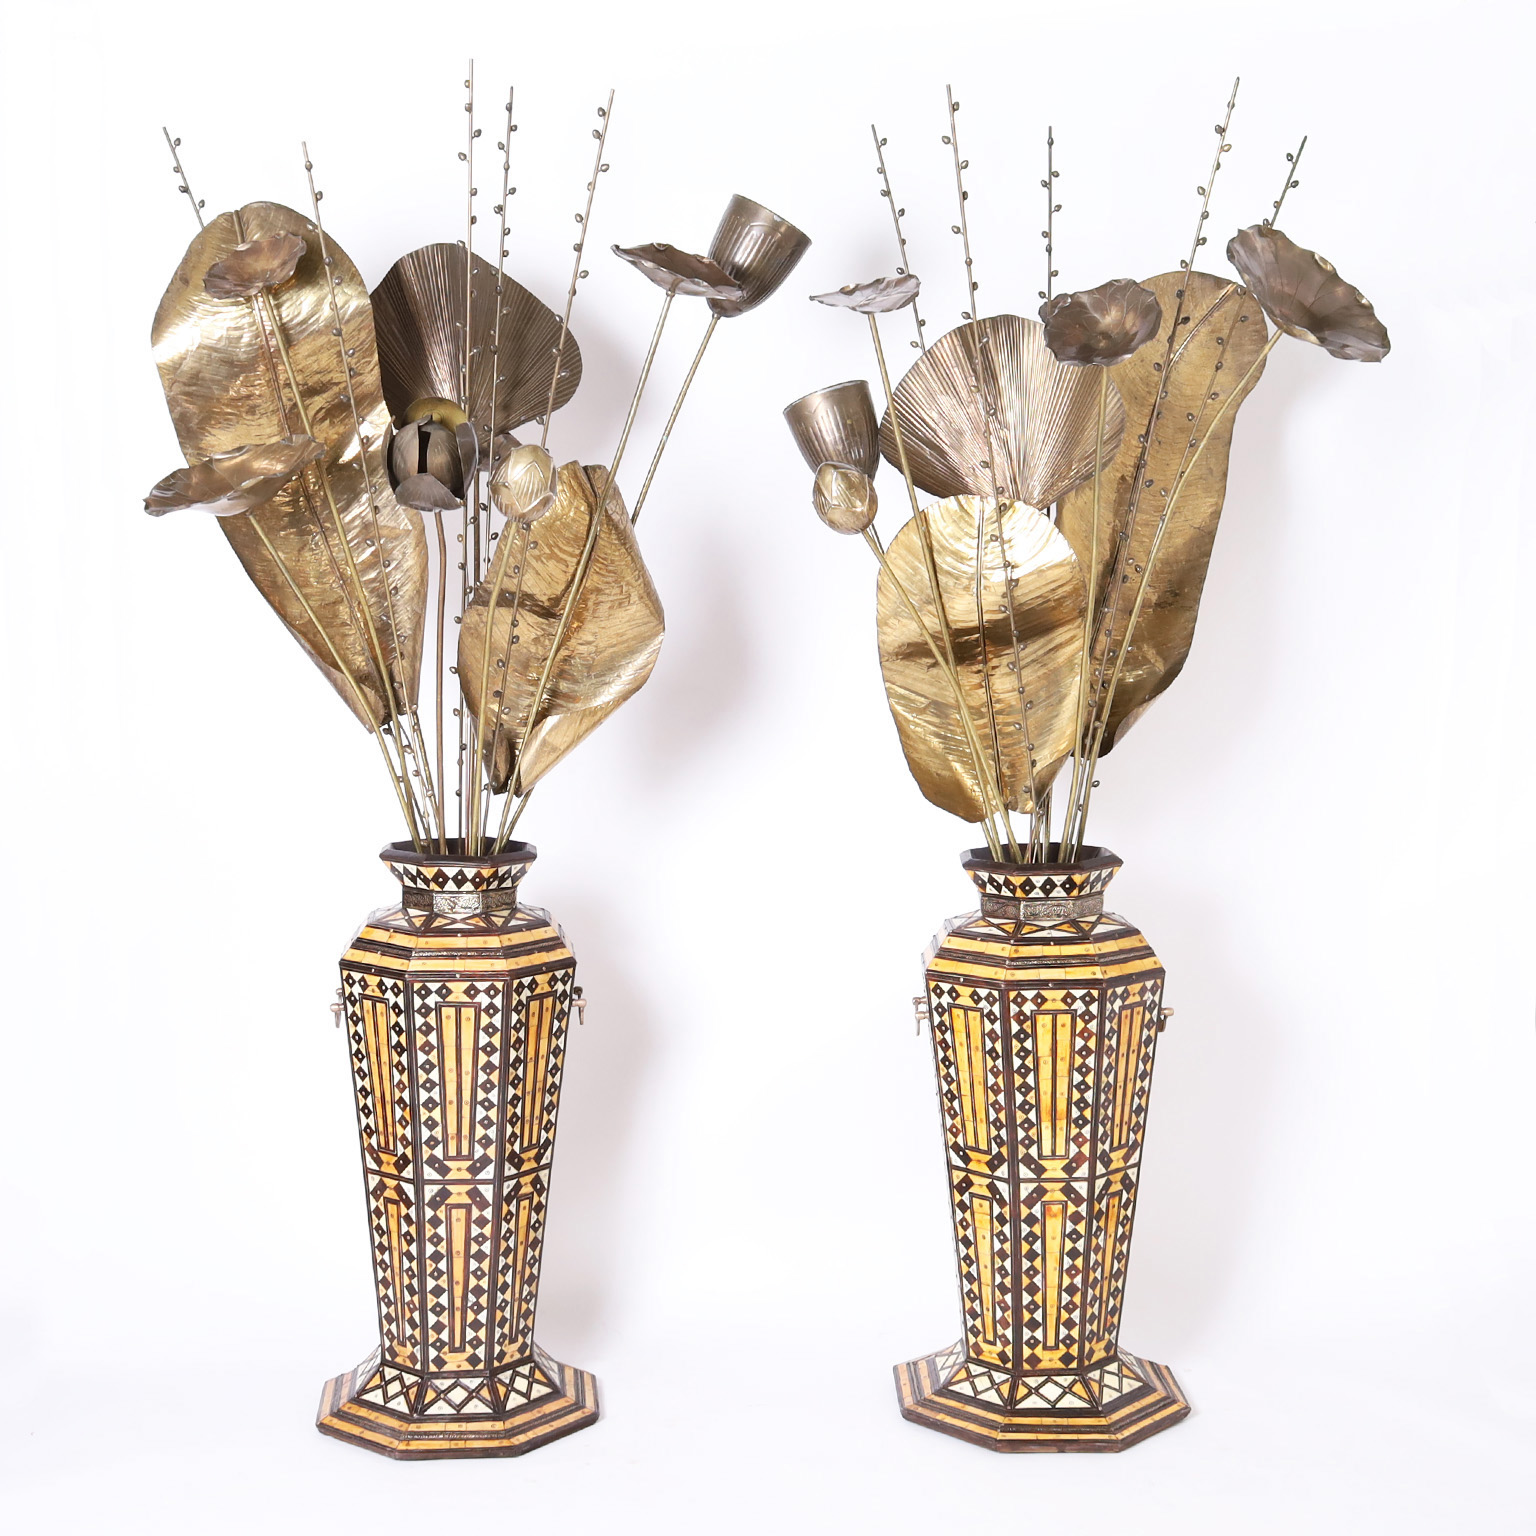 Pair of Vintage Turkish Palace Urns with Brass Floral Arrangements